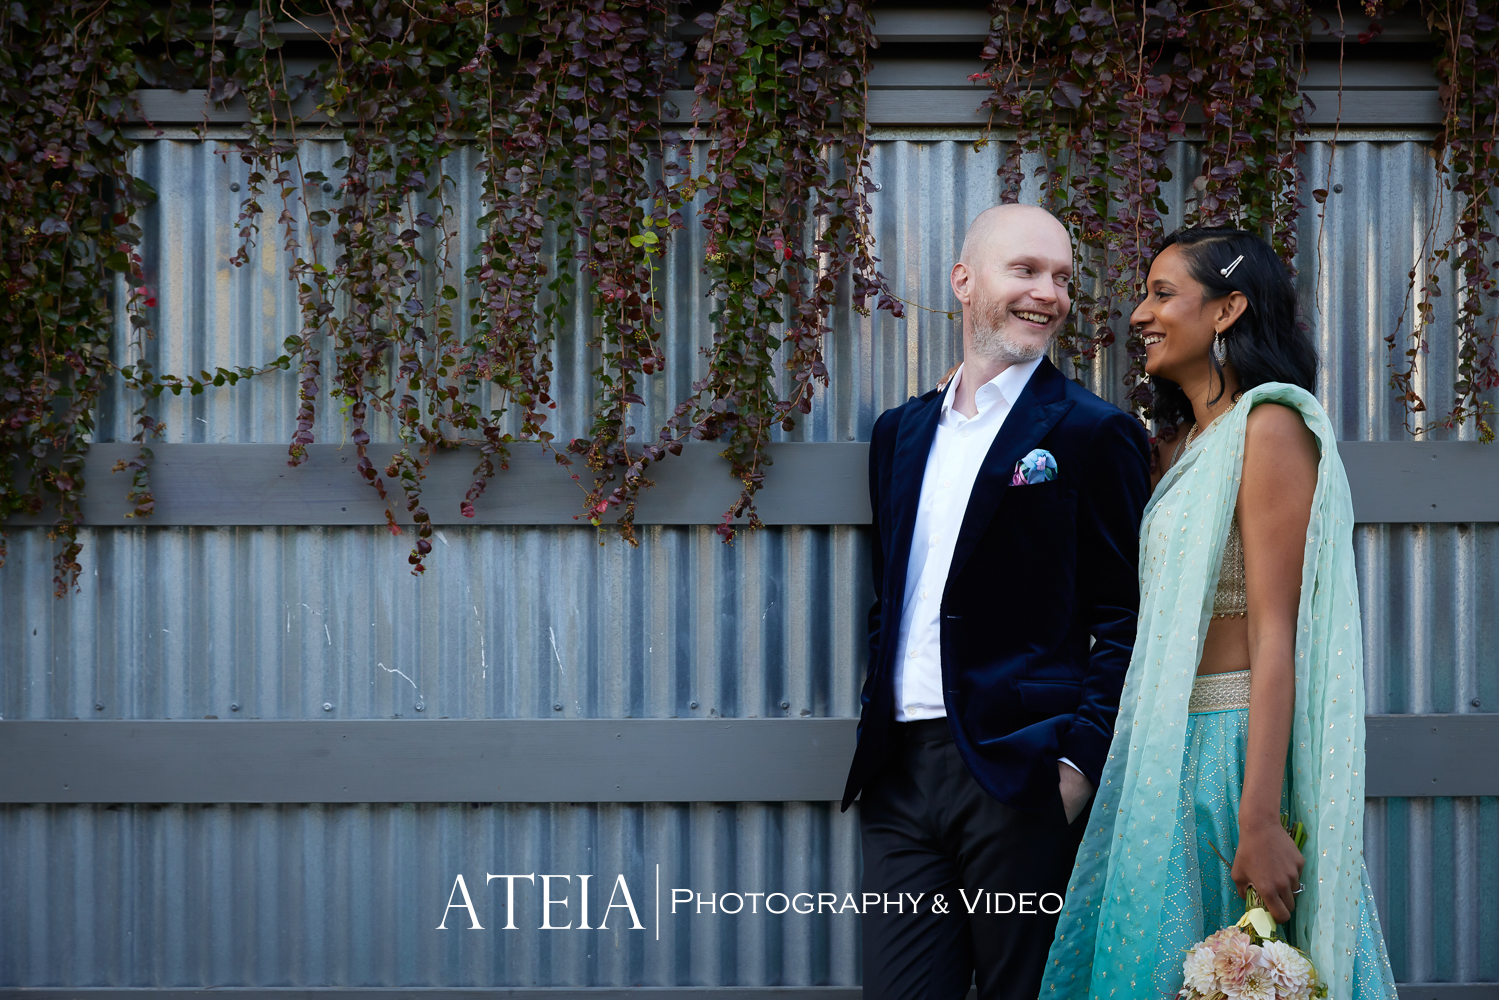 , Shiv and Jono&#8217;s wedding at St Andrews Conservatory captured by ATEIA Photography &#038; Video